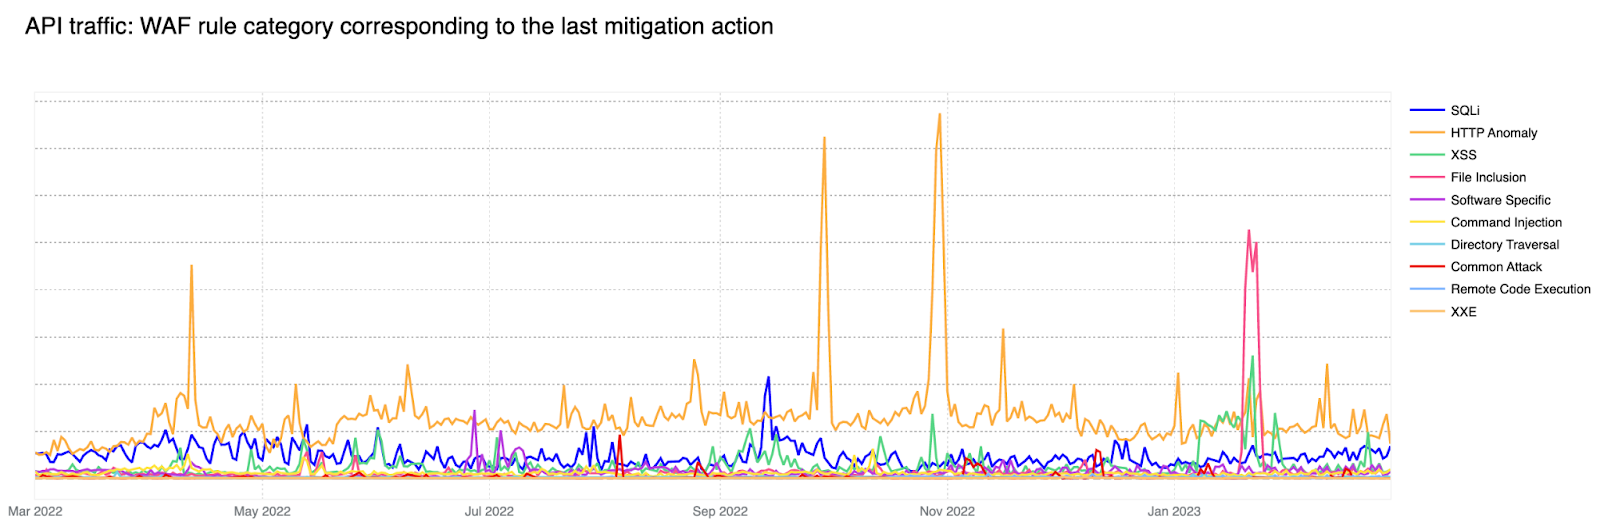 WAF rule category corresponding to the last mitigation action on API traffic over the last 12 months